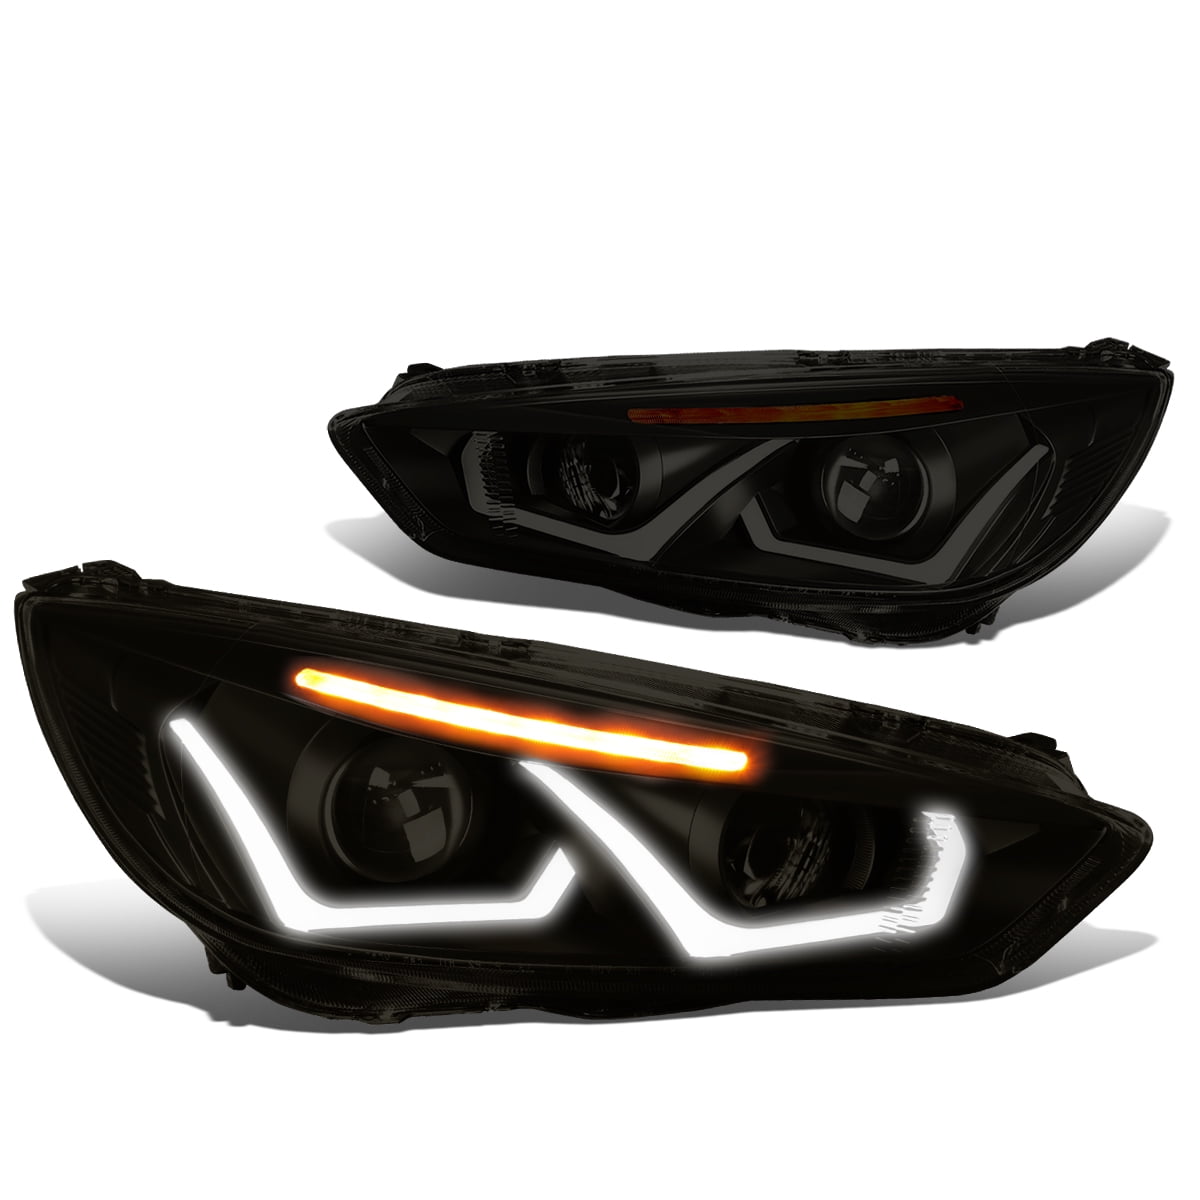 LED Dual Halo Fit 2015-2018 Ford Focus Smoked Amber Projector Headlight/Lamp 